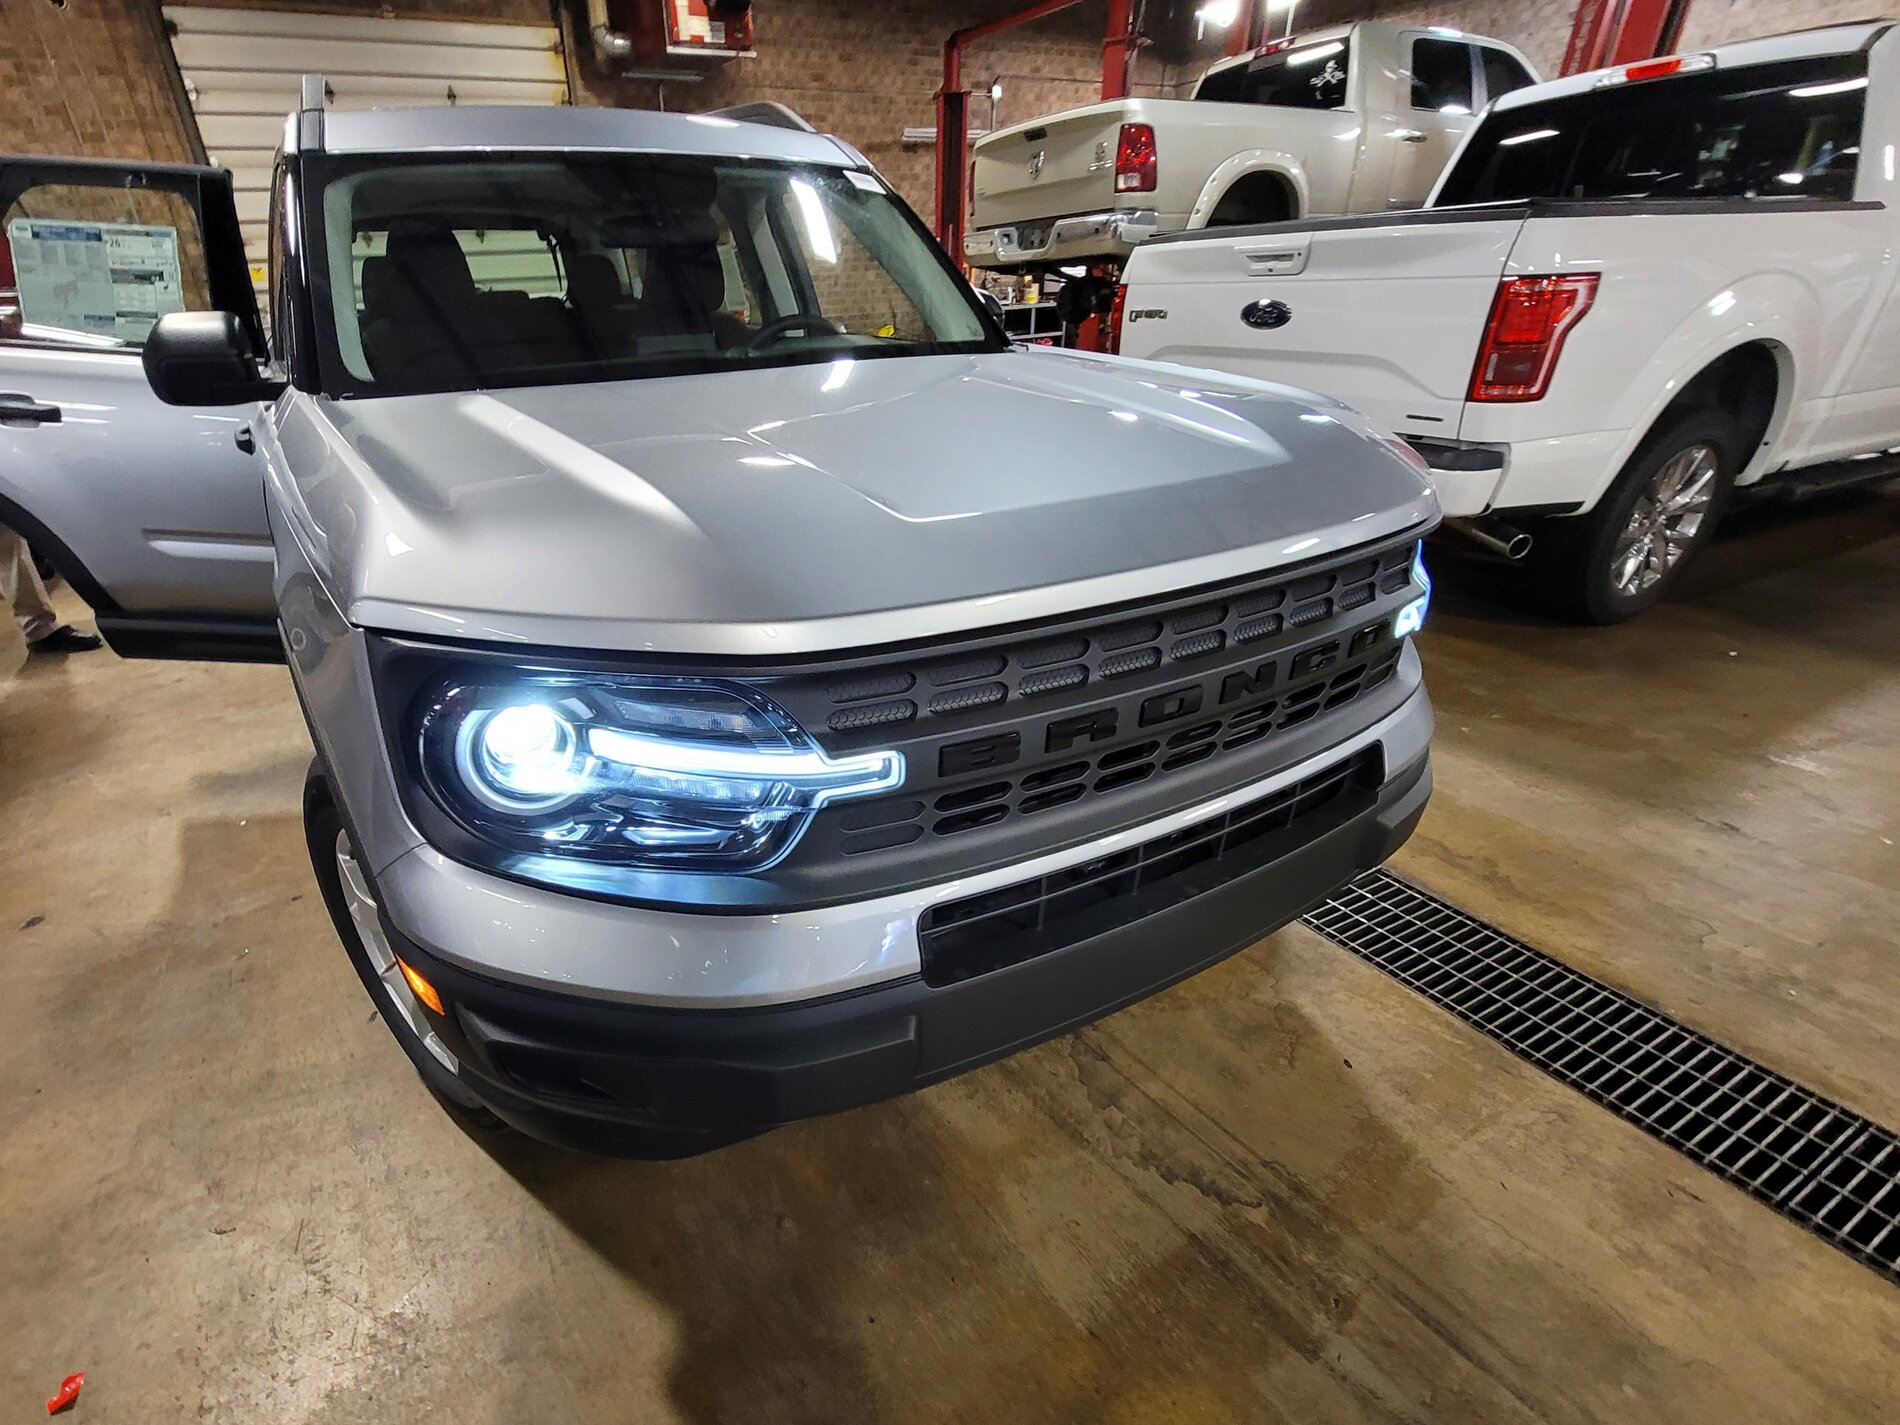 Ford Bronco Iconic Silver Paint Thread 20210106_102459